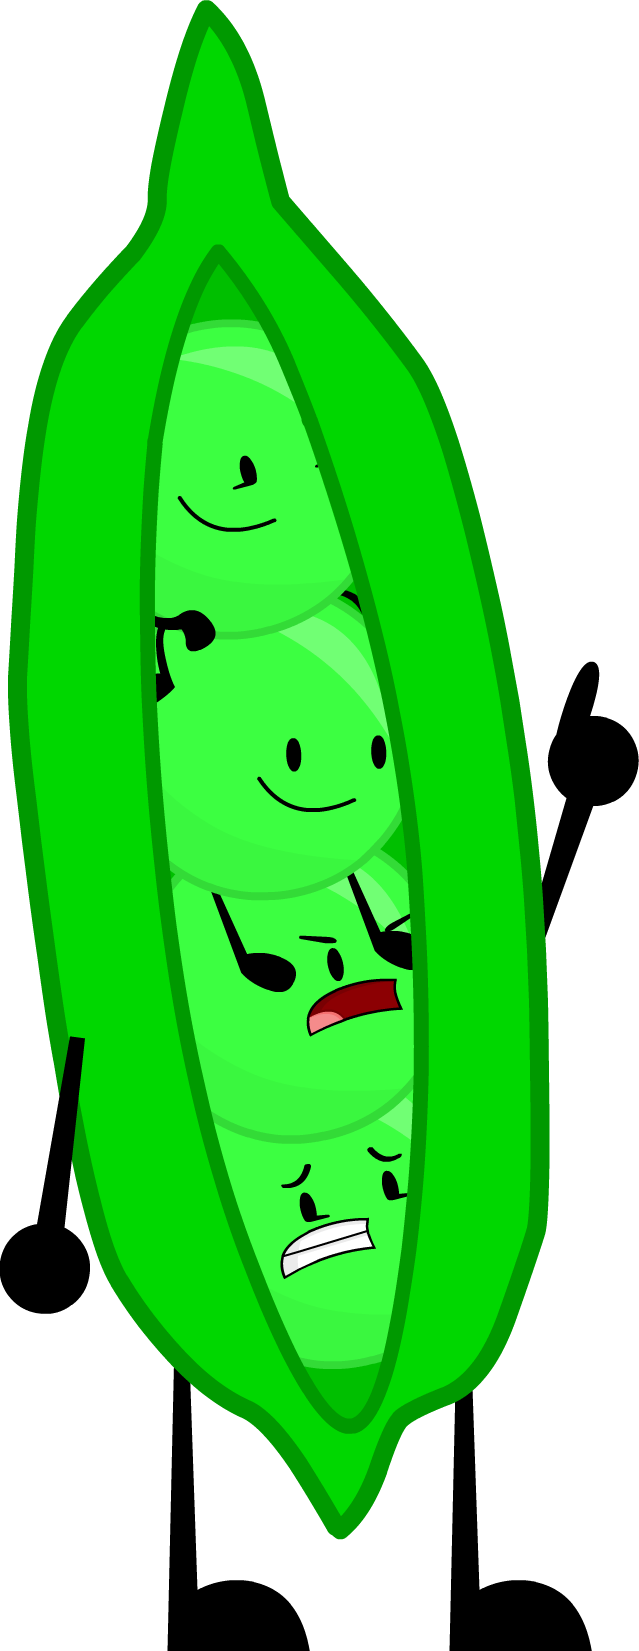 Pea anthropomorphic world wiki. Peas clipart green object